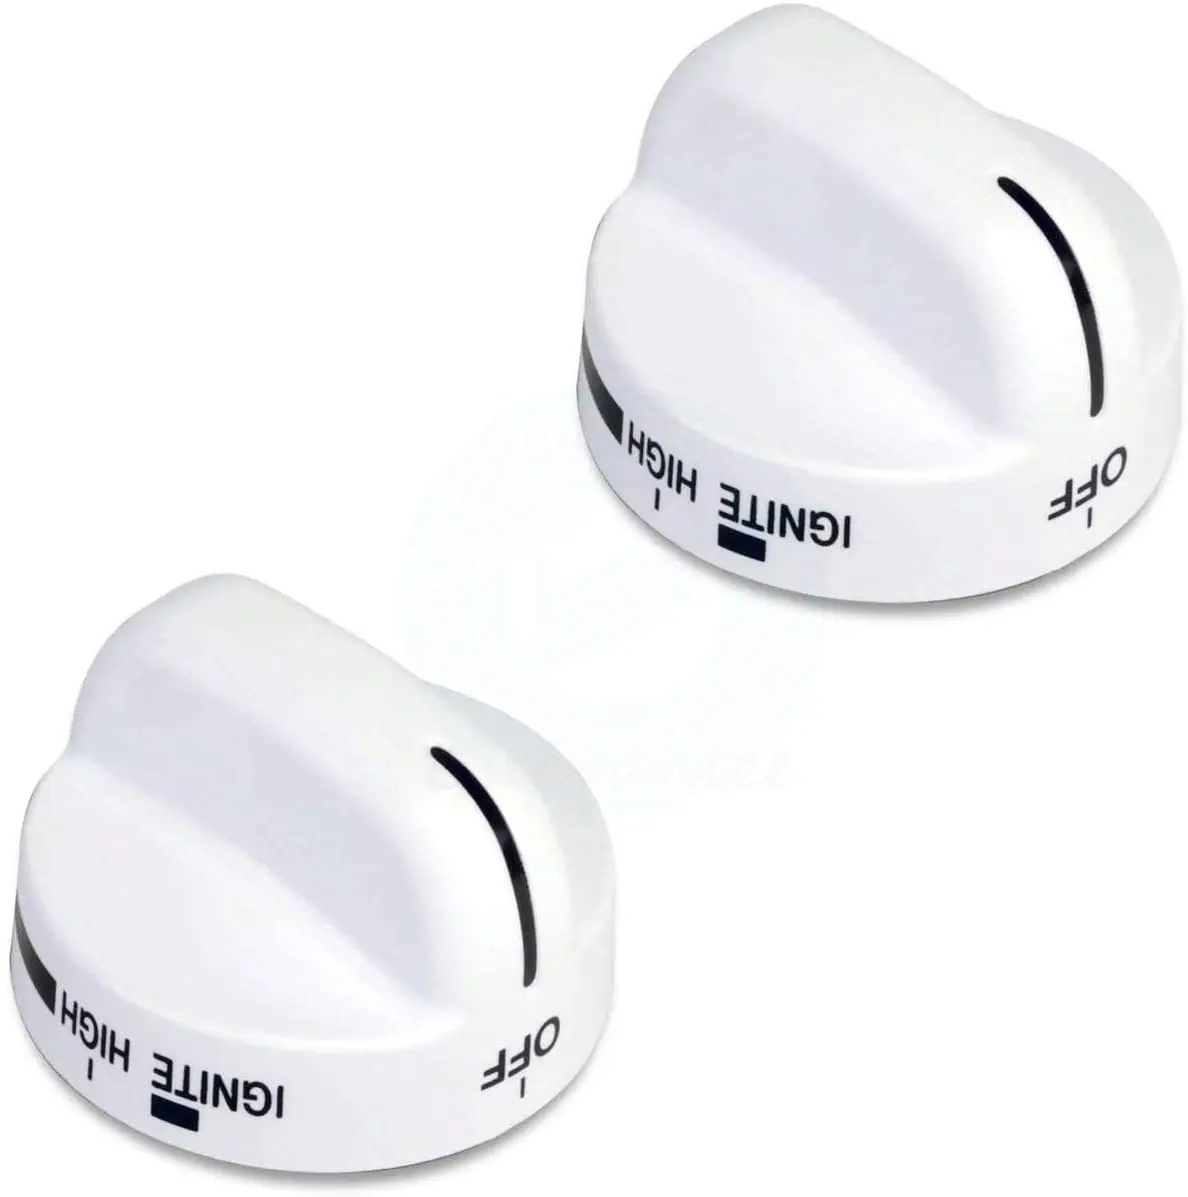 
Range Top Surface Burner Knobs Fits Whirlpool Roper Maytag White 8273104 Knob for Whirlpool Stove 